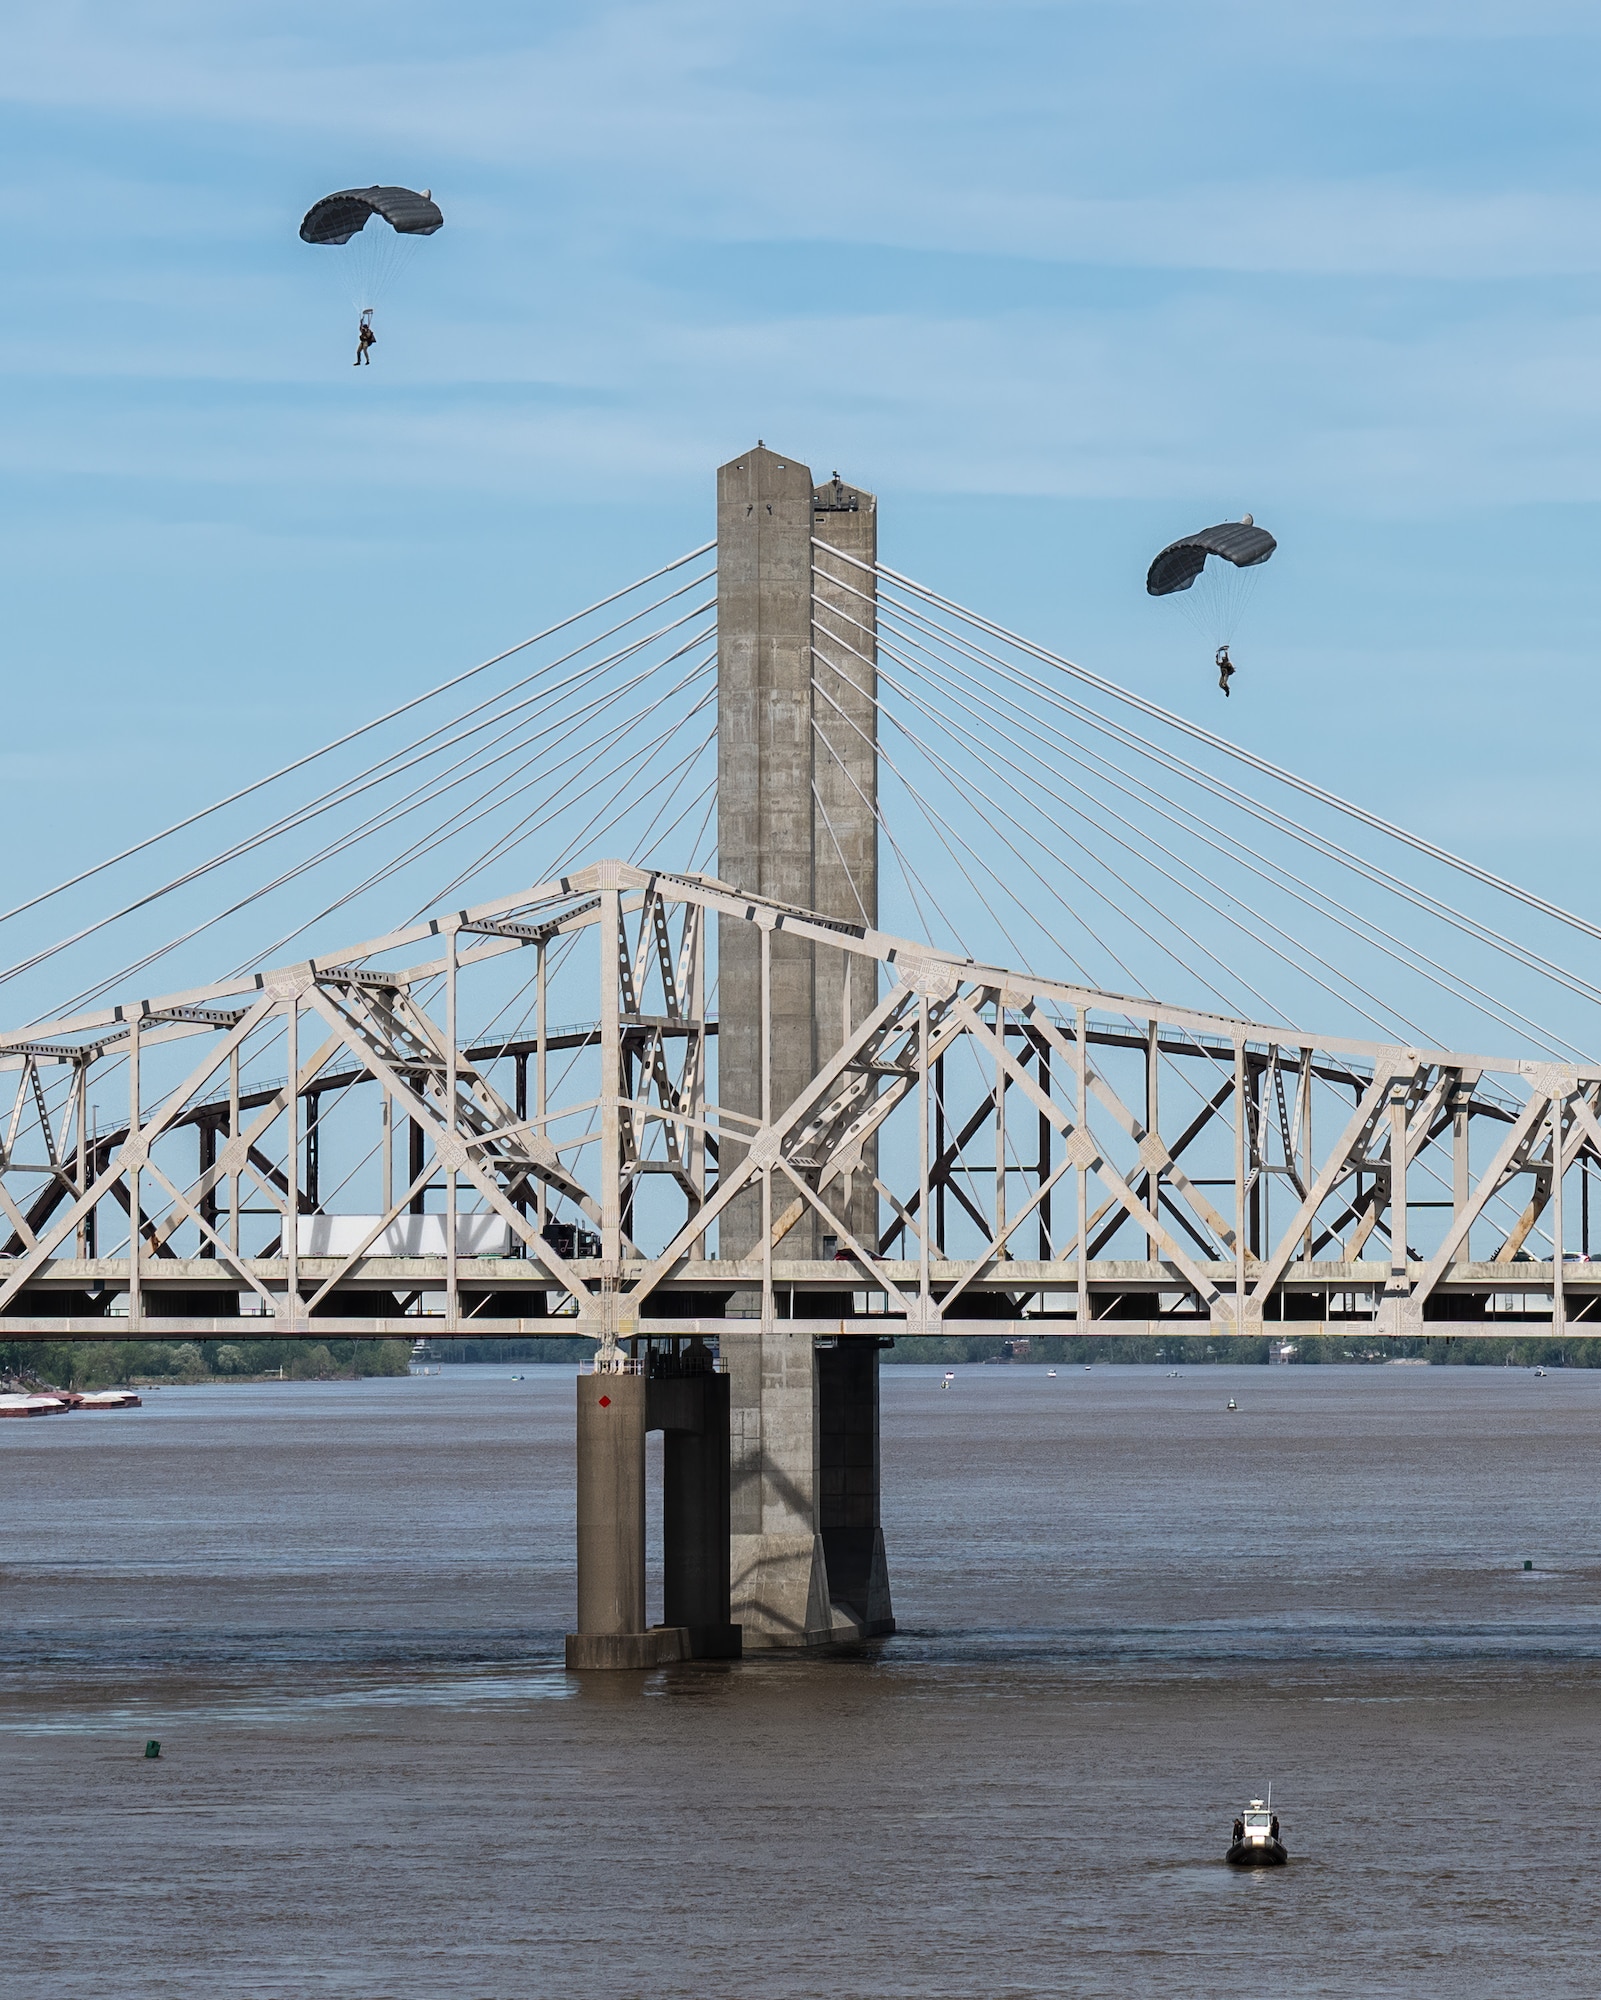 Two pararescuemen from the Kentucky Air National Guard’s 123rd Special Tactics Squadron parachute into the Ohio River as part of a demonstration during the Thunder Over Louisville air show in Louisville, Ky., April 20, 2024. This year’s event featured more than two-dozen military and civilian planes, including the Kentucky Air National Guard’s C130J Super Hercules. (U.S. Air National Guard photo by Dale Greer)